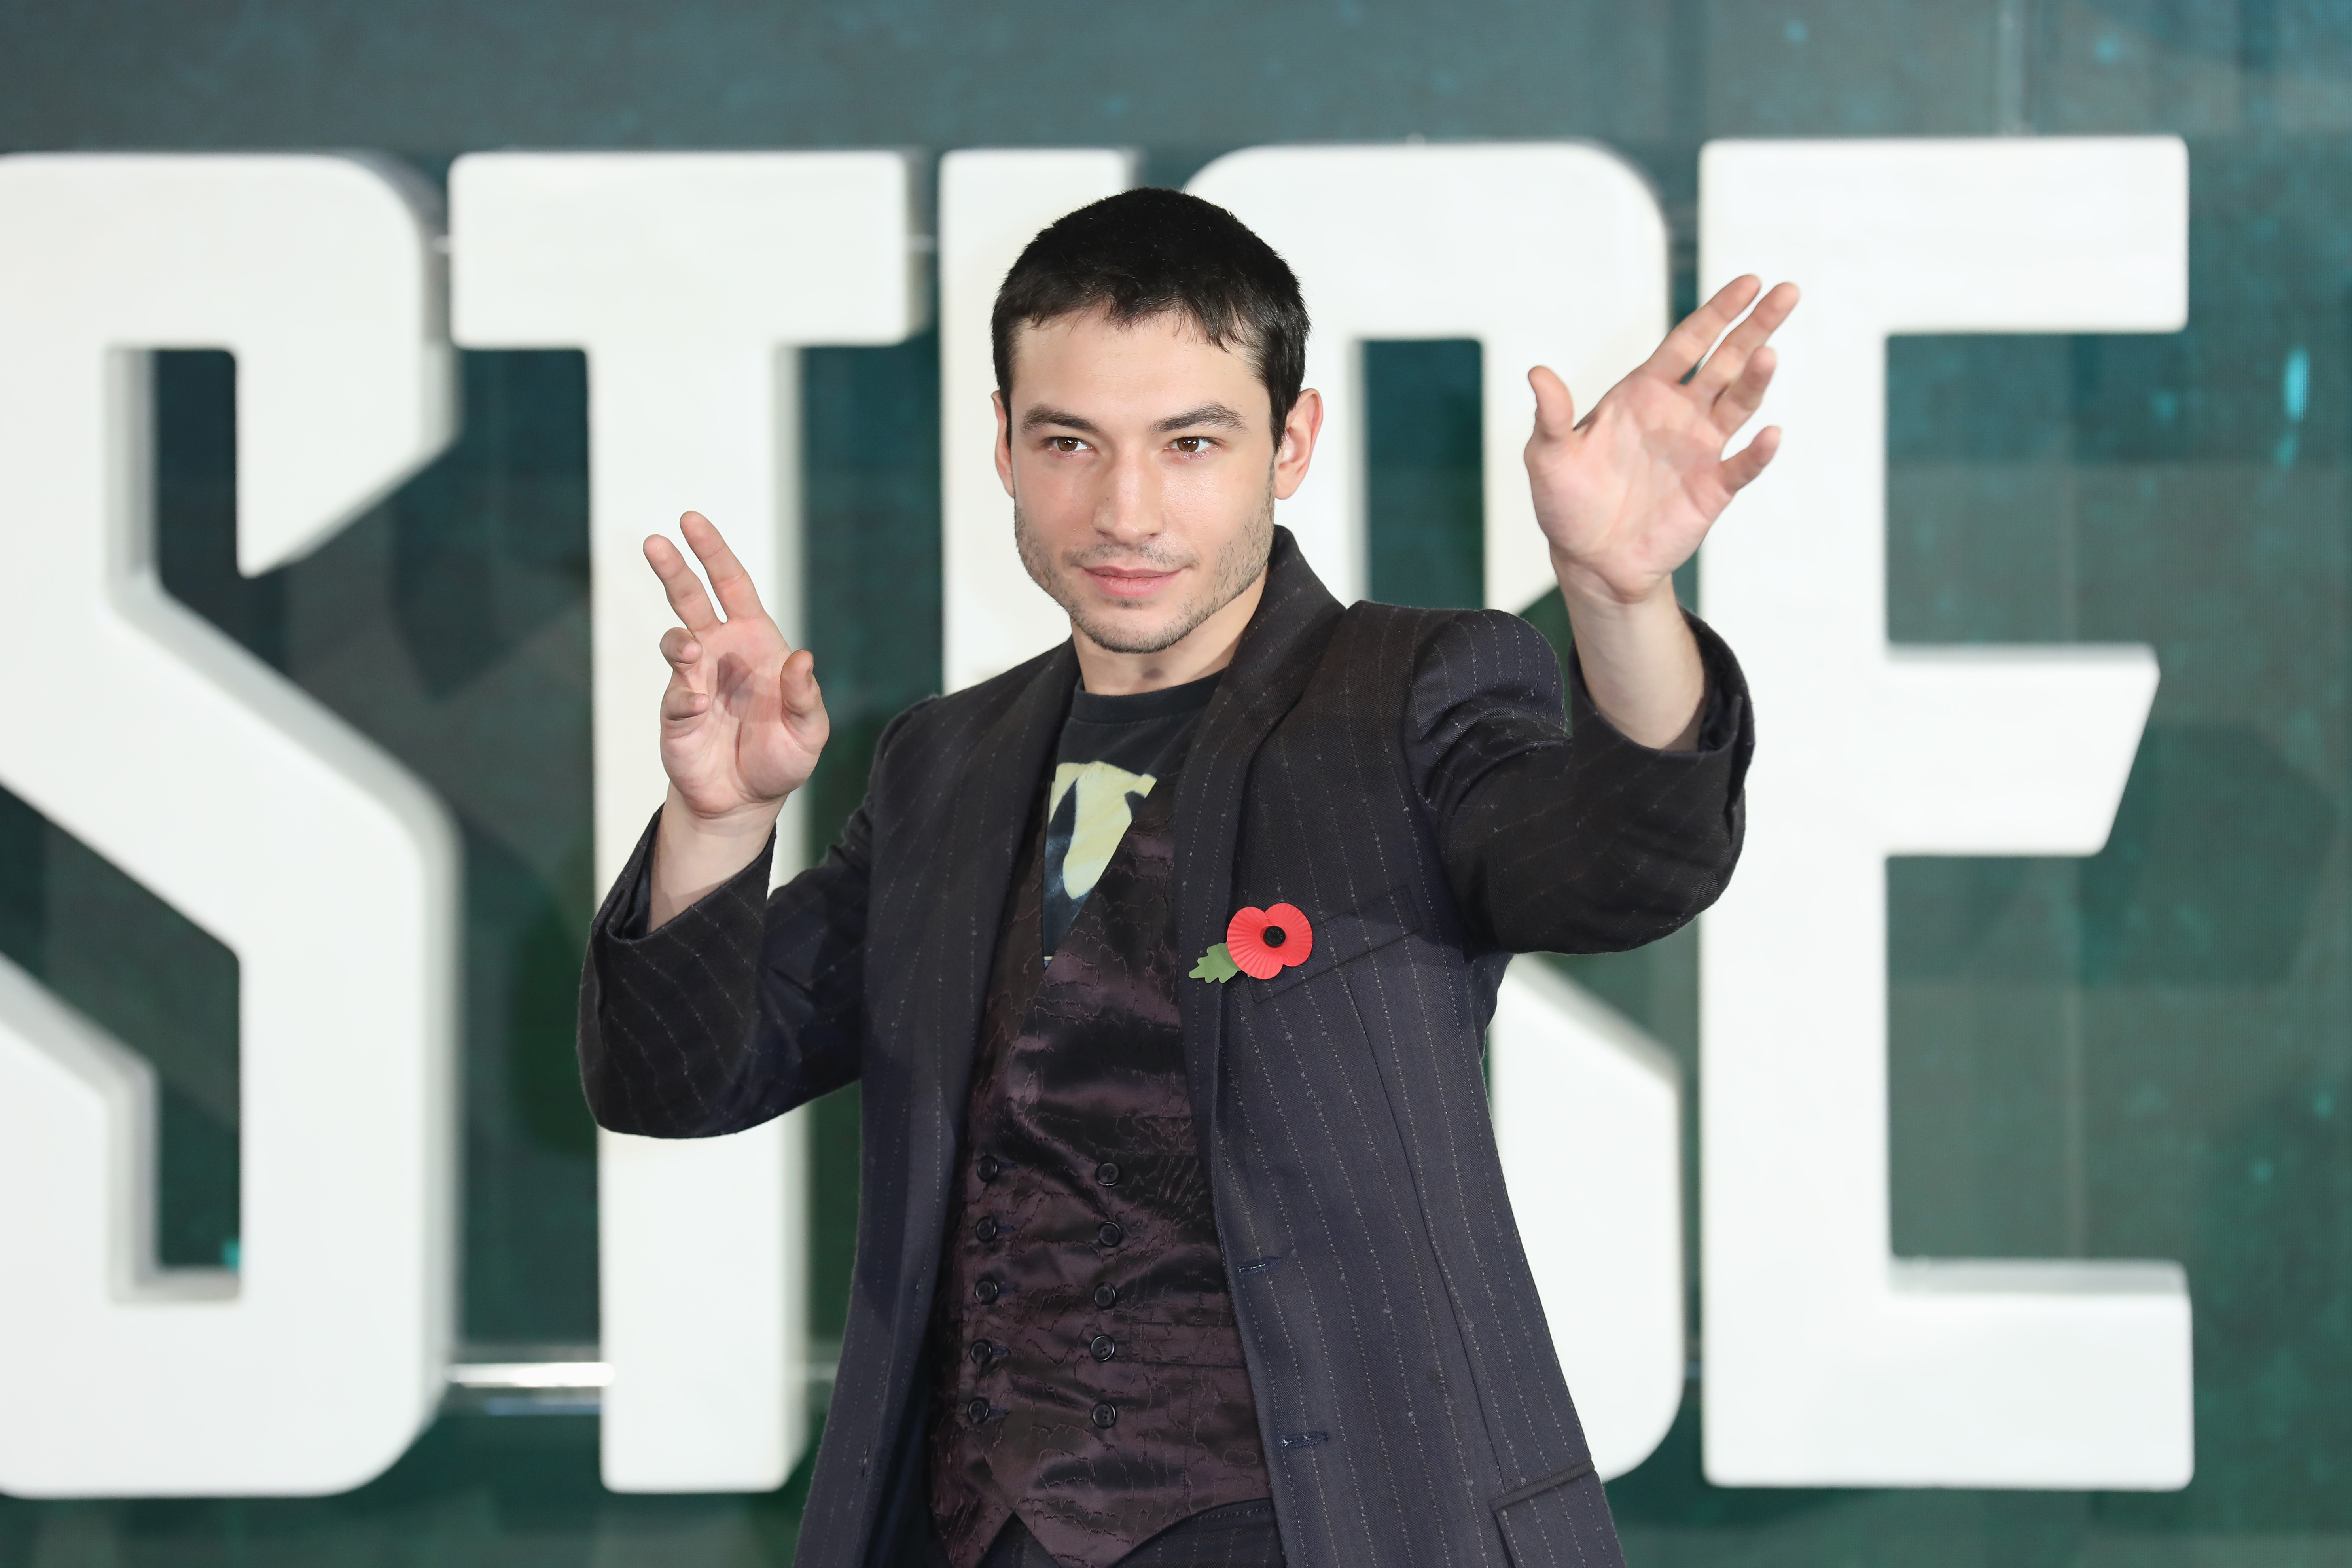 Ezra Miller Arrested In Hawaii After Becoming “Agitated” At Bar: Report